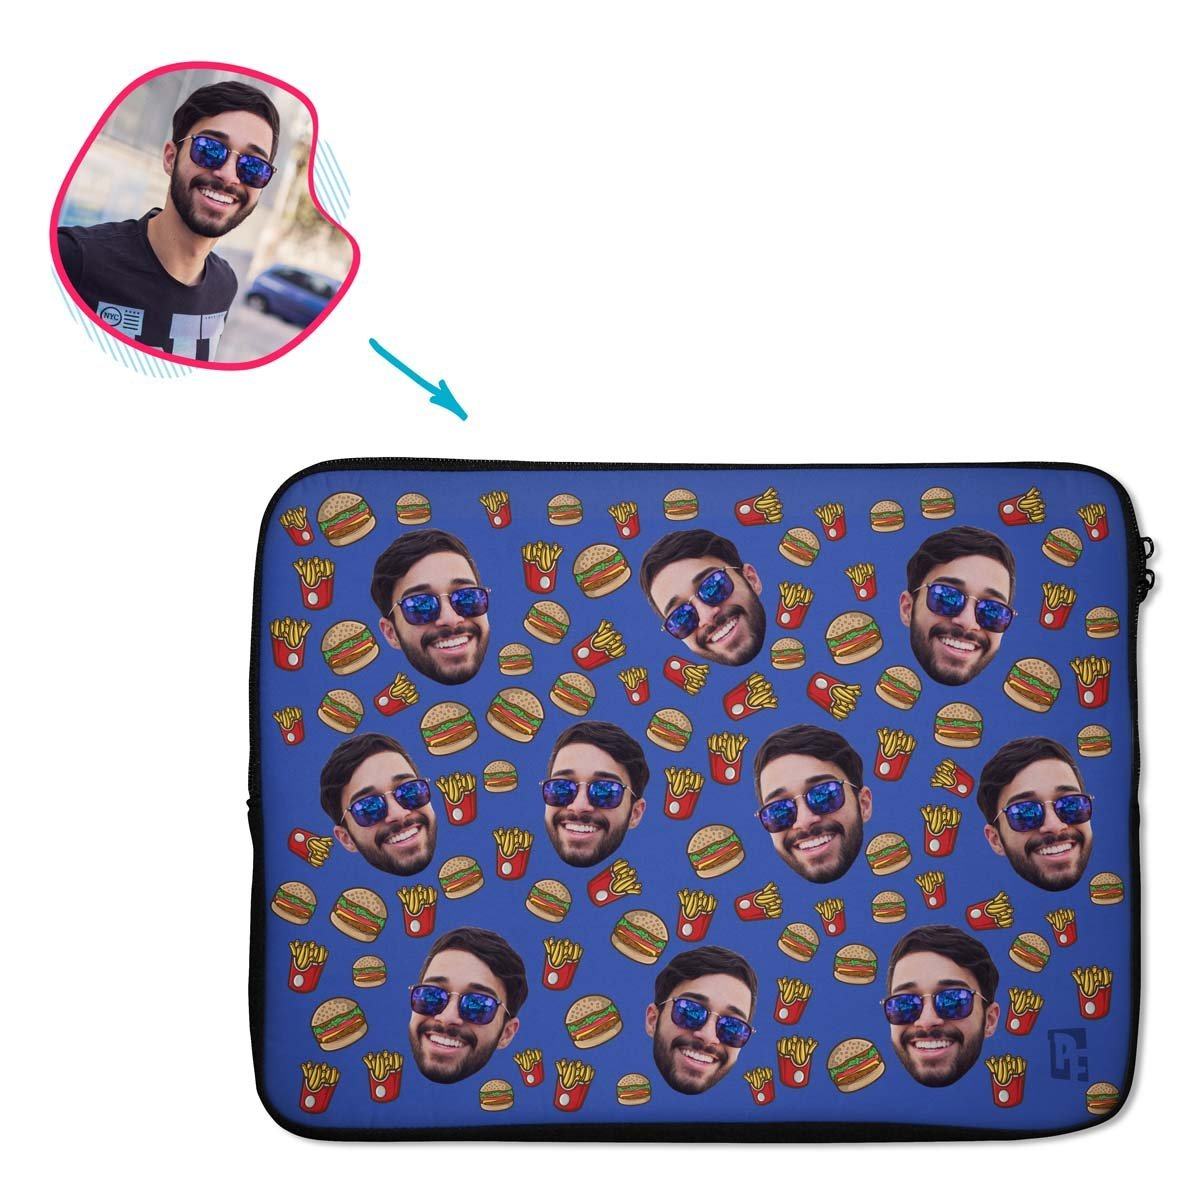 darkblue Fastfood laptop sleeve personalized with photo of face printed on them